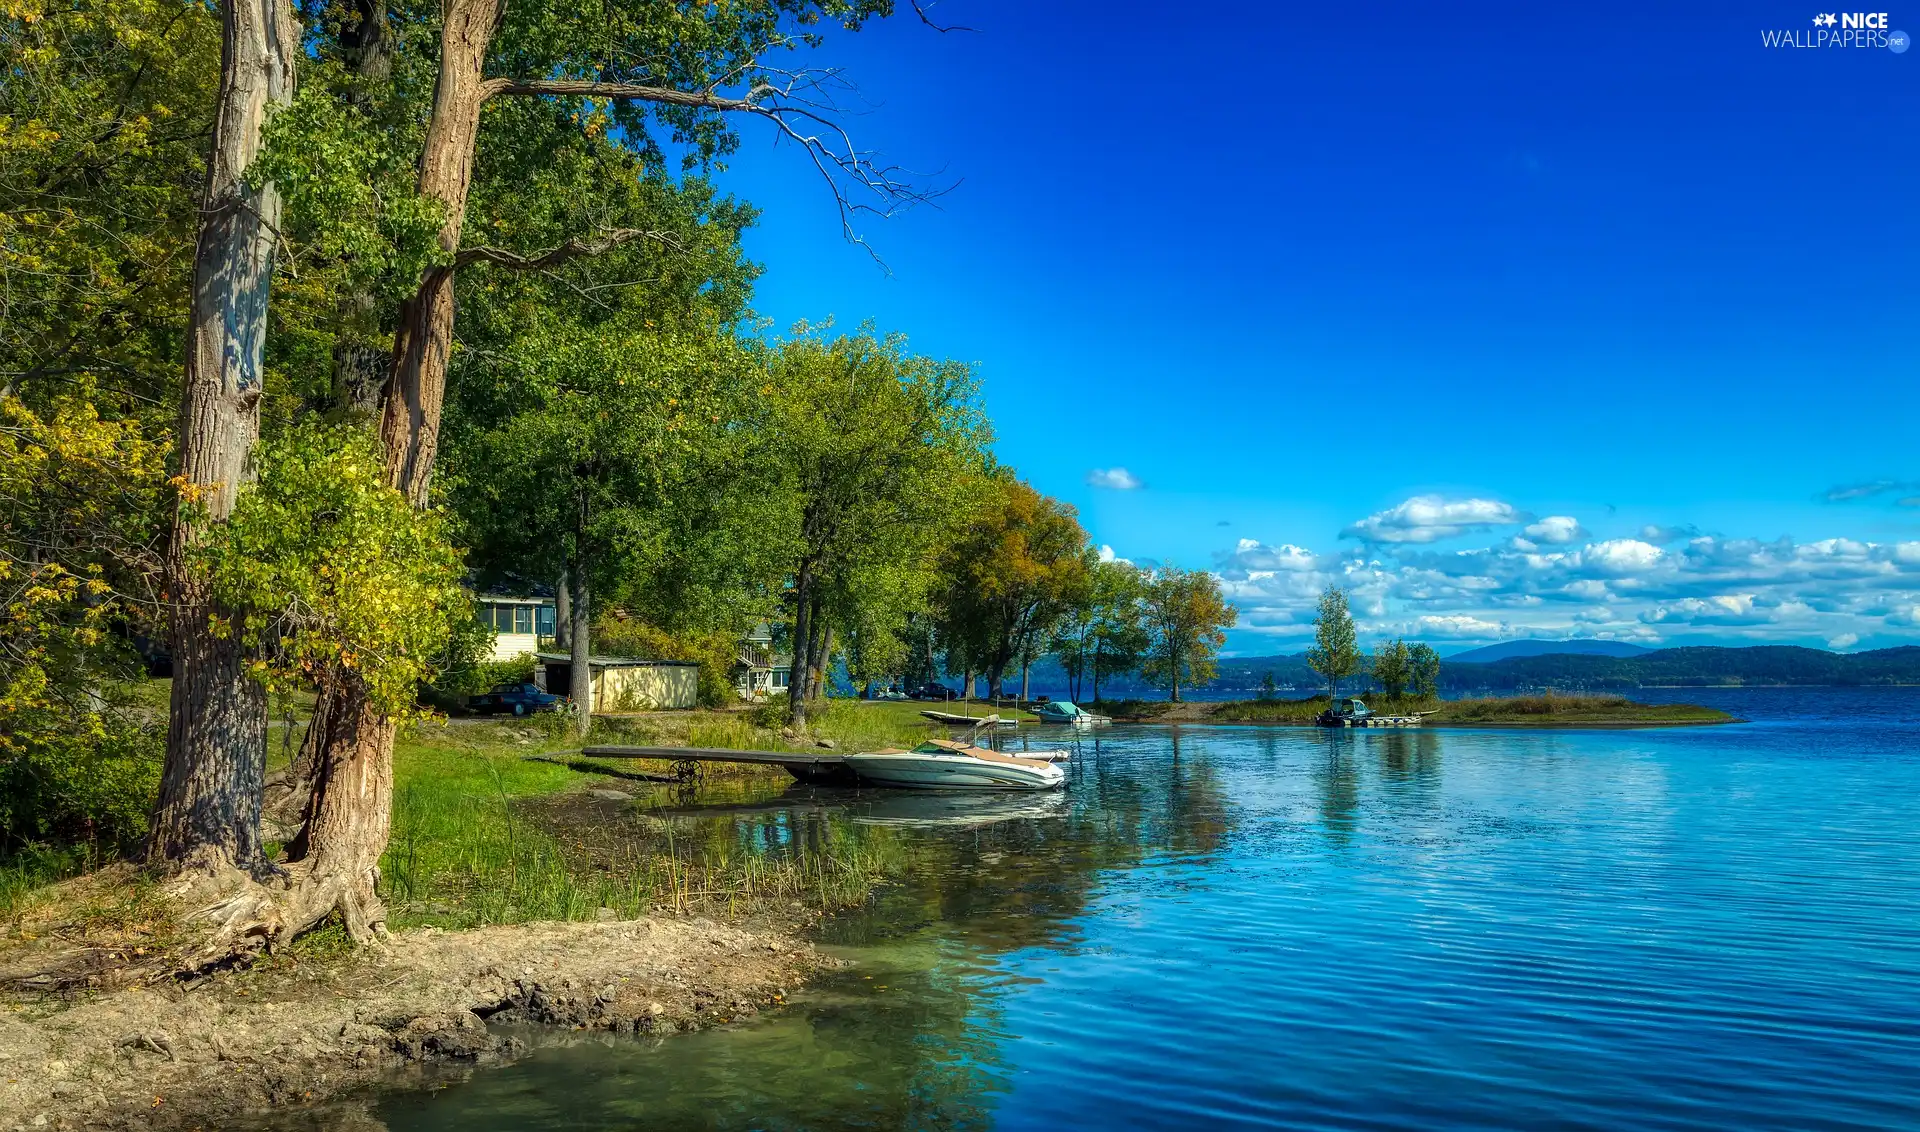 trees, lake, blue, boats, summer, viewes, Sky